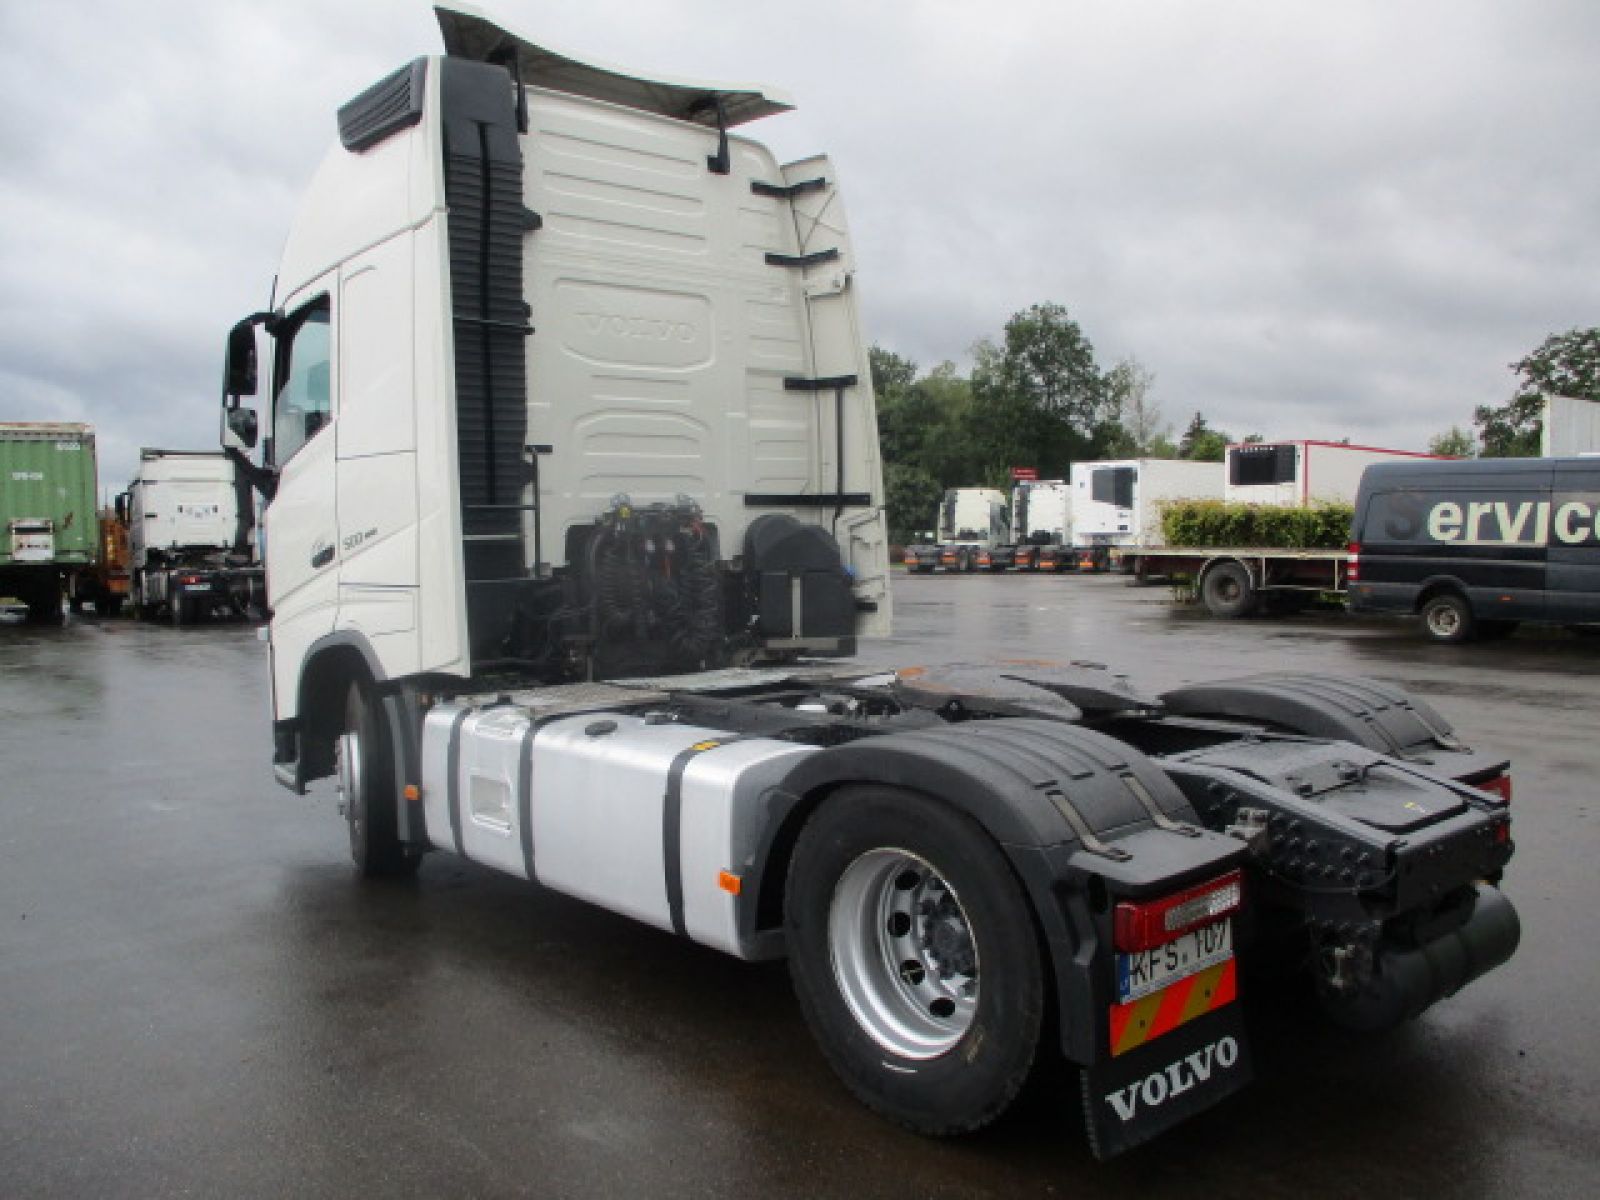  Unidades tractoras - VOLVO FH 500  TRACTEUR (Belgique - Europe) - Houffalize Trading s.a.